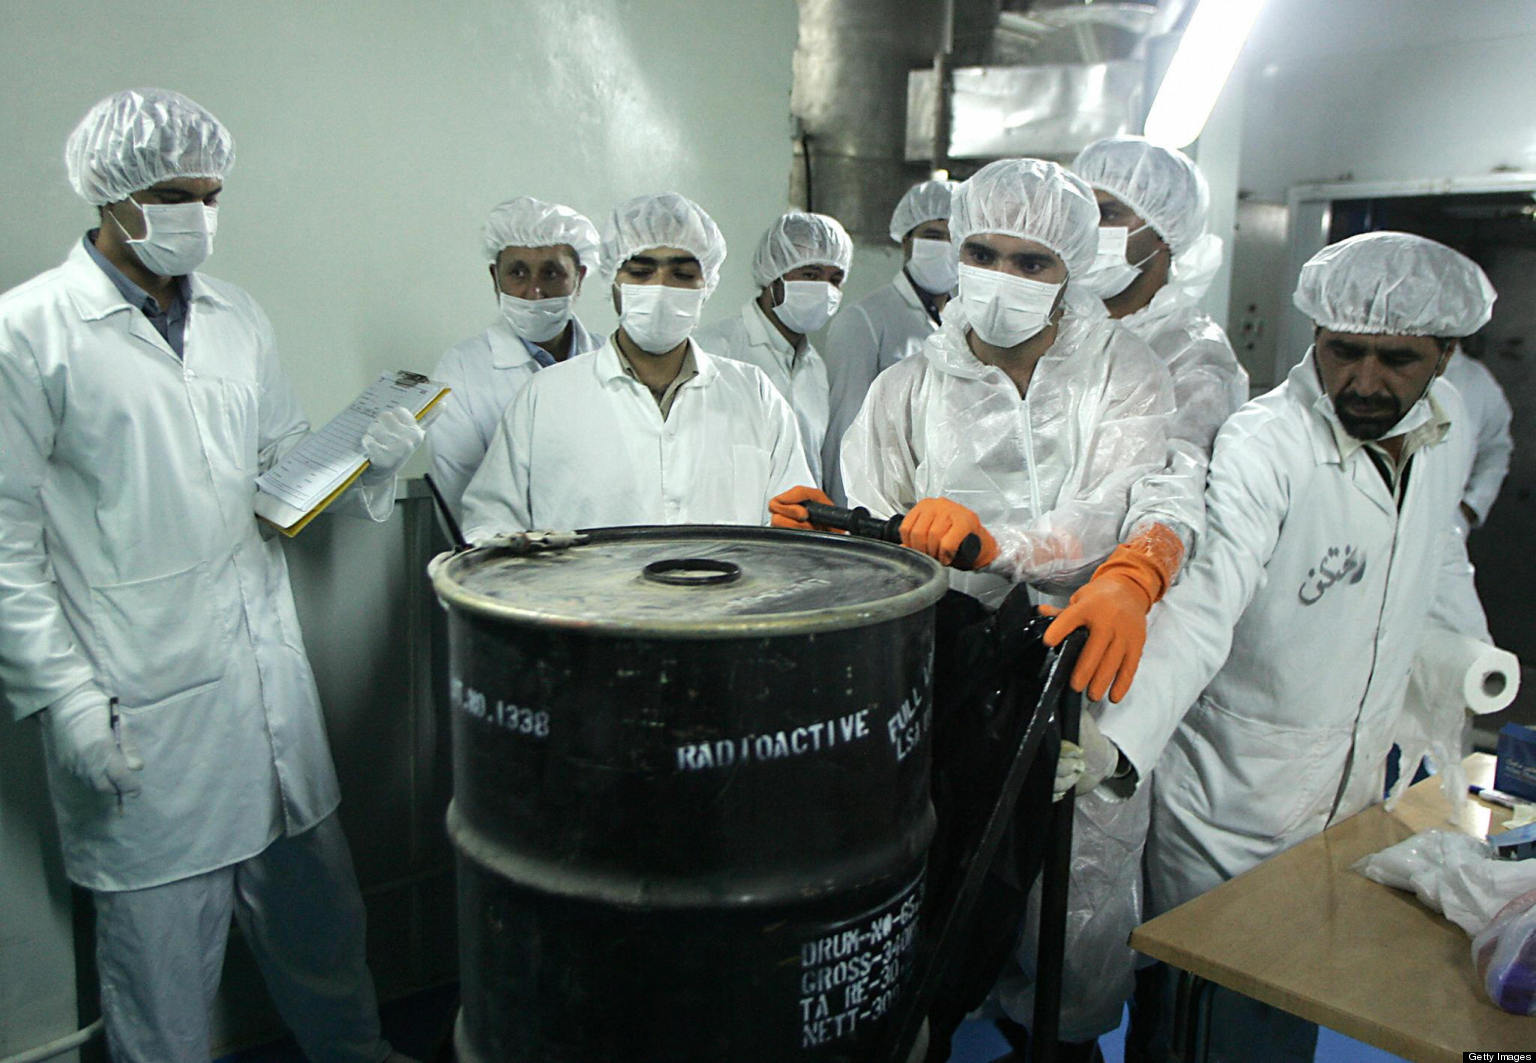 ISFAHAN, IRAN: Iranian technicians remove a container of radioactive uranium, 'yellow cake', sealed by the International Atomic Energy Agency, to be used at the Isfahan Uranium Conversion Facilities (UCF), 420 kms south of Tehran, 08 August 2005. Iran looked set to resume sensitive nuclear fuel work imminently after the arrival of UN inspectors at a uranium conversion plant, a move that would put it on a collision course with the West. AFP PHOTO/BEHROUZ MEHRI (Photo credit should read BEHROUZ MEHRI/AFP/Getty Images)